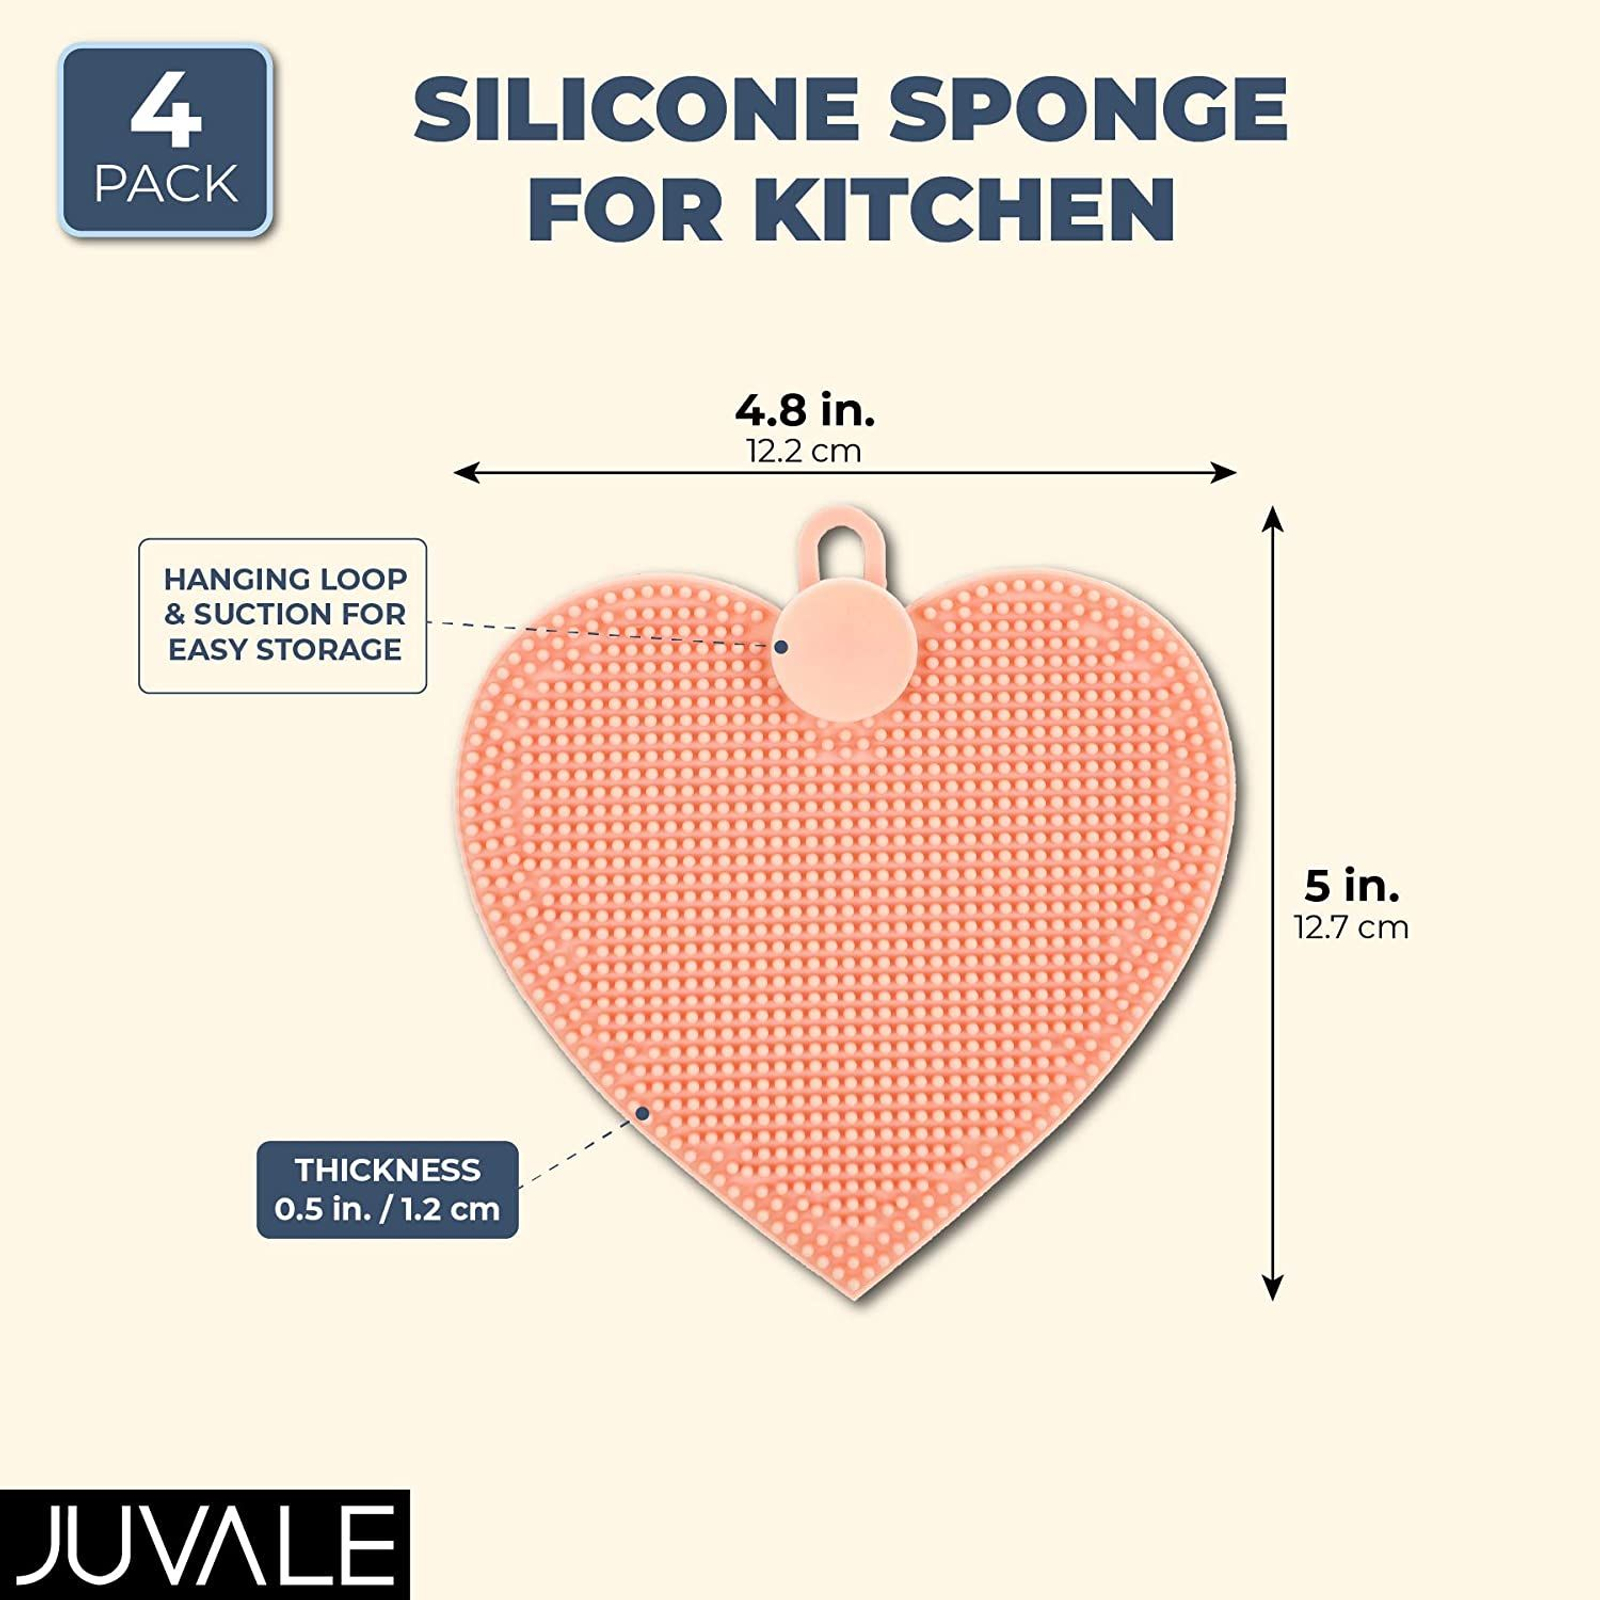 Juvale Silicone 4-Pack Pink Heart Kitchen Sponge, 4.8 x 5 inch, Size: 4.8 x 5 x 0.5